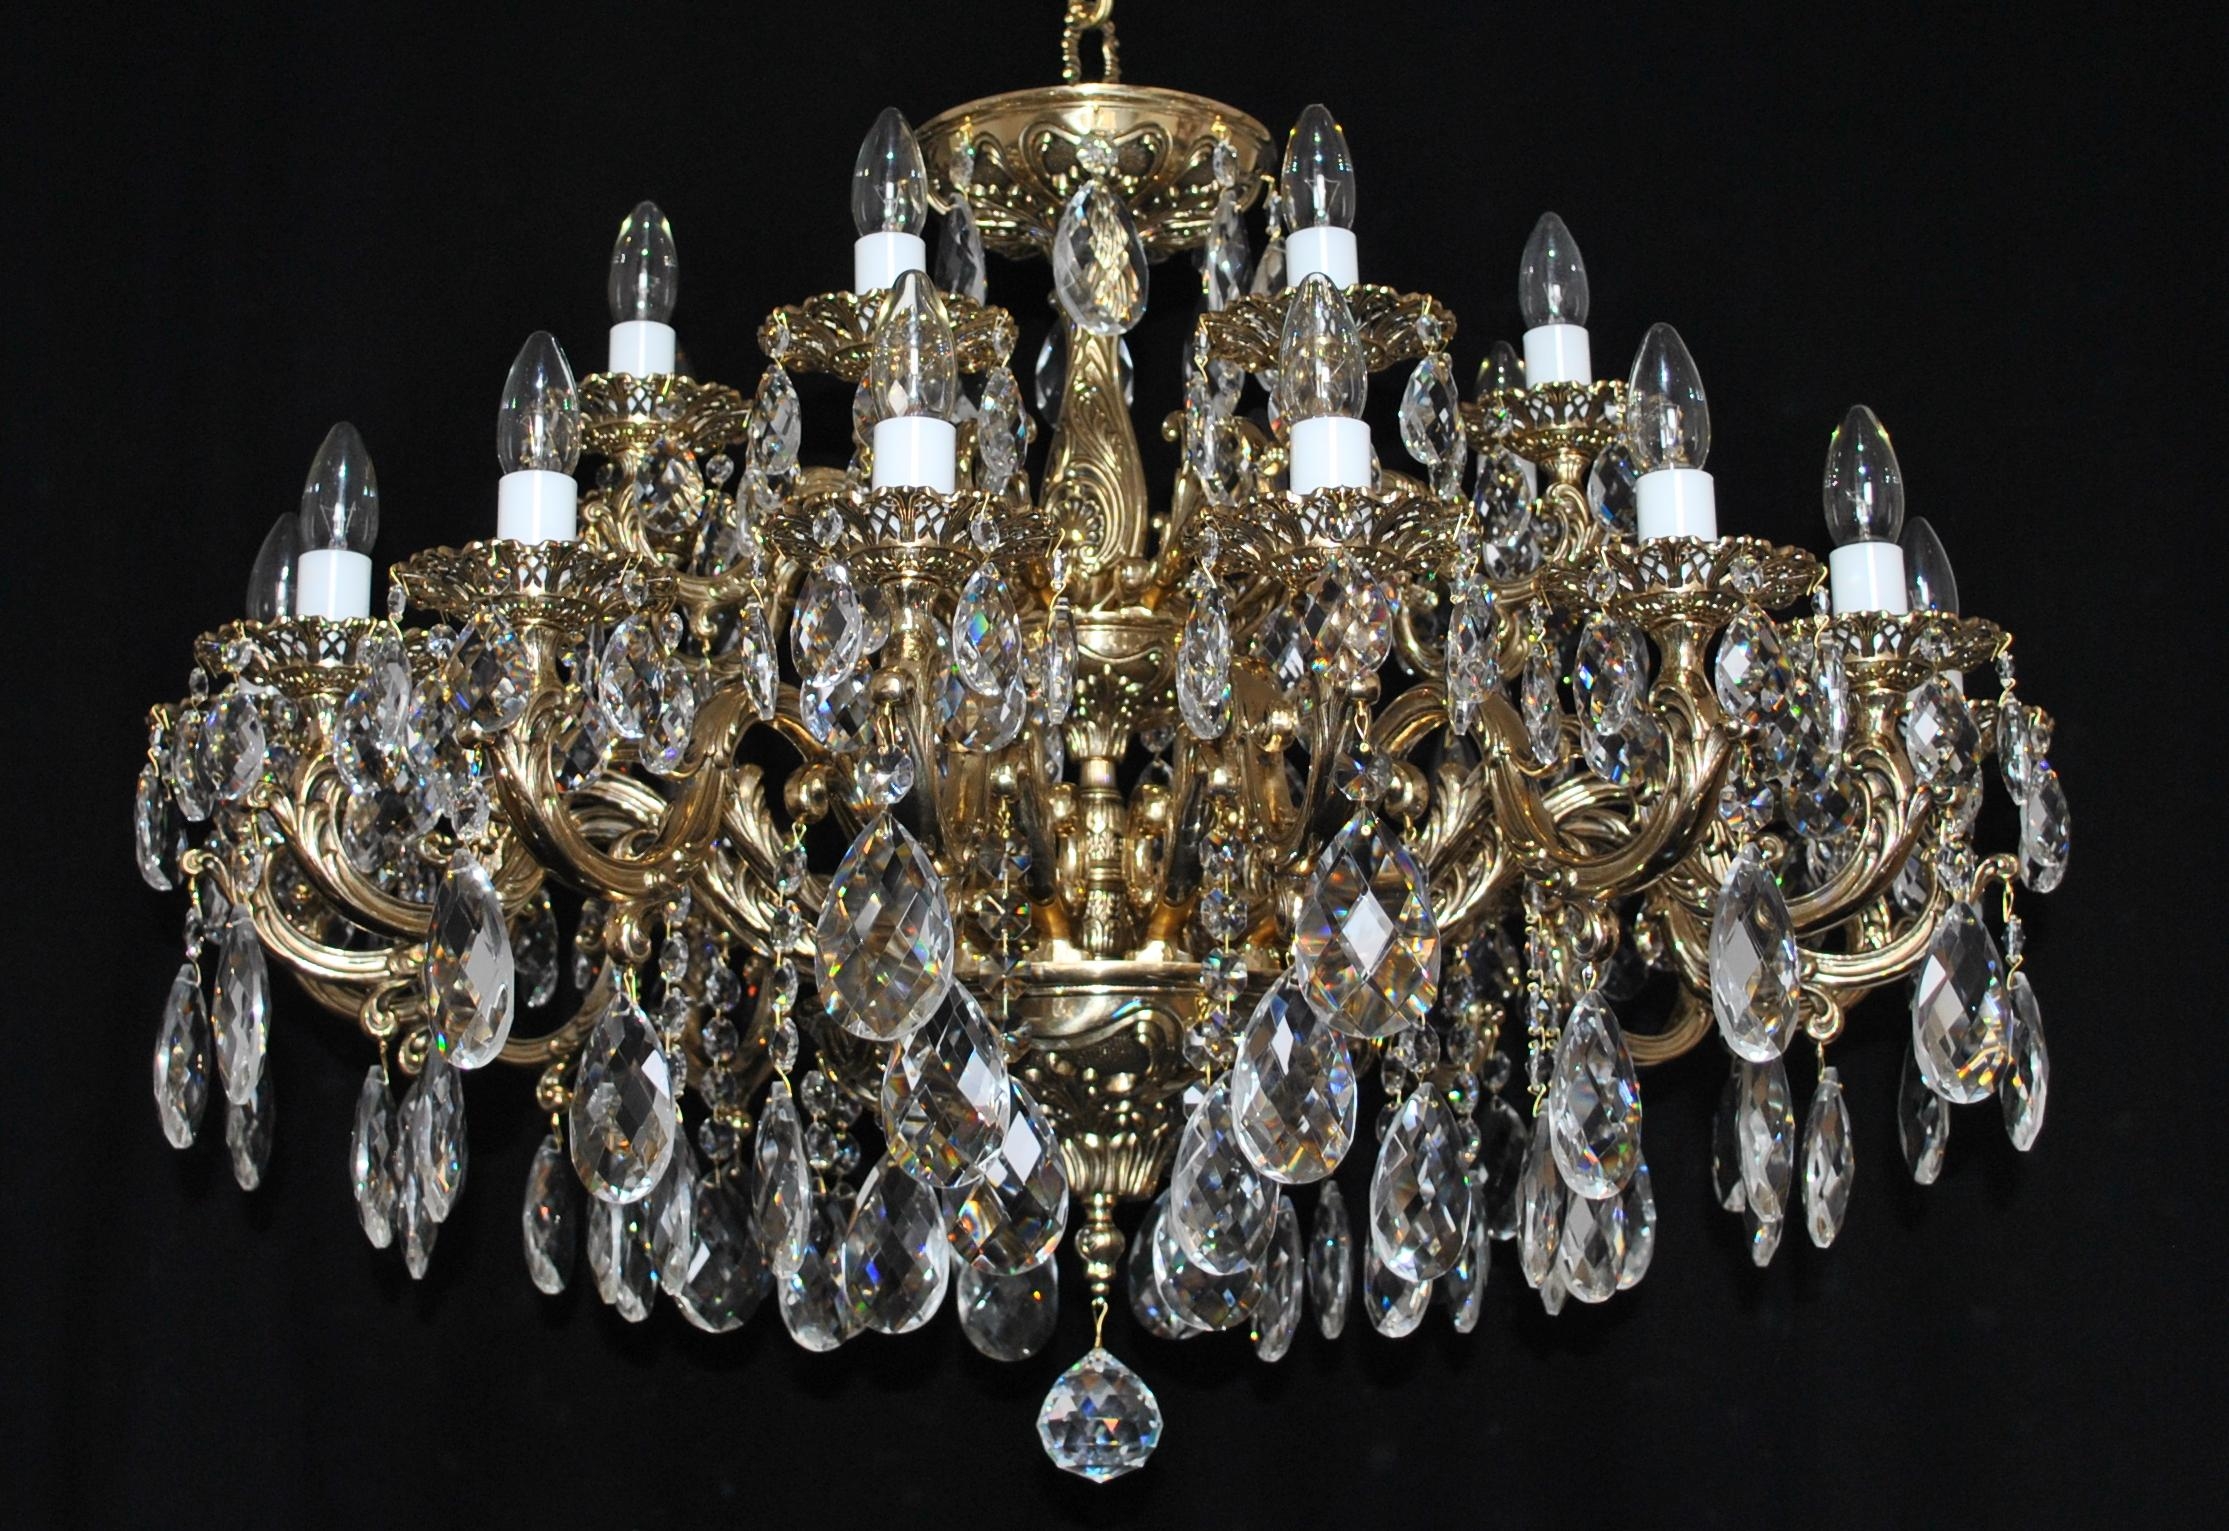 10 Arms cast brass chandeliers with cut lead almonds in the shape